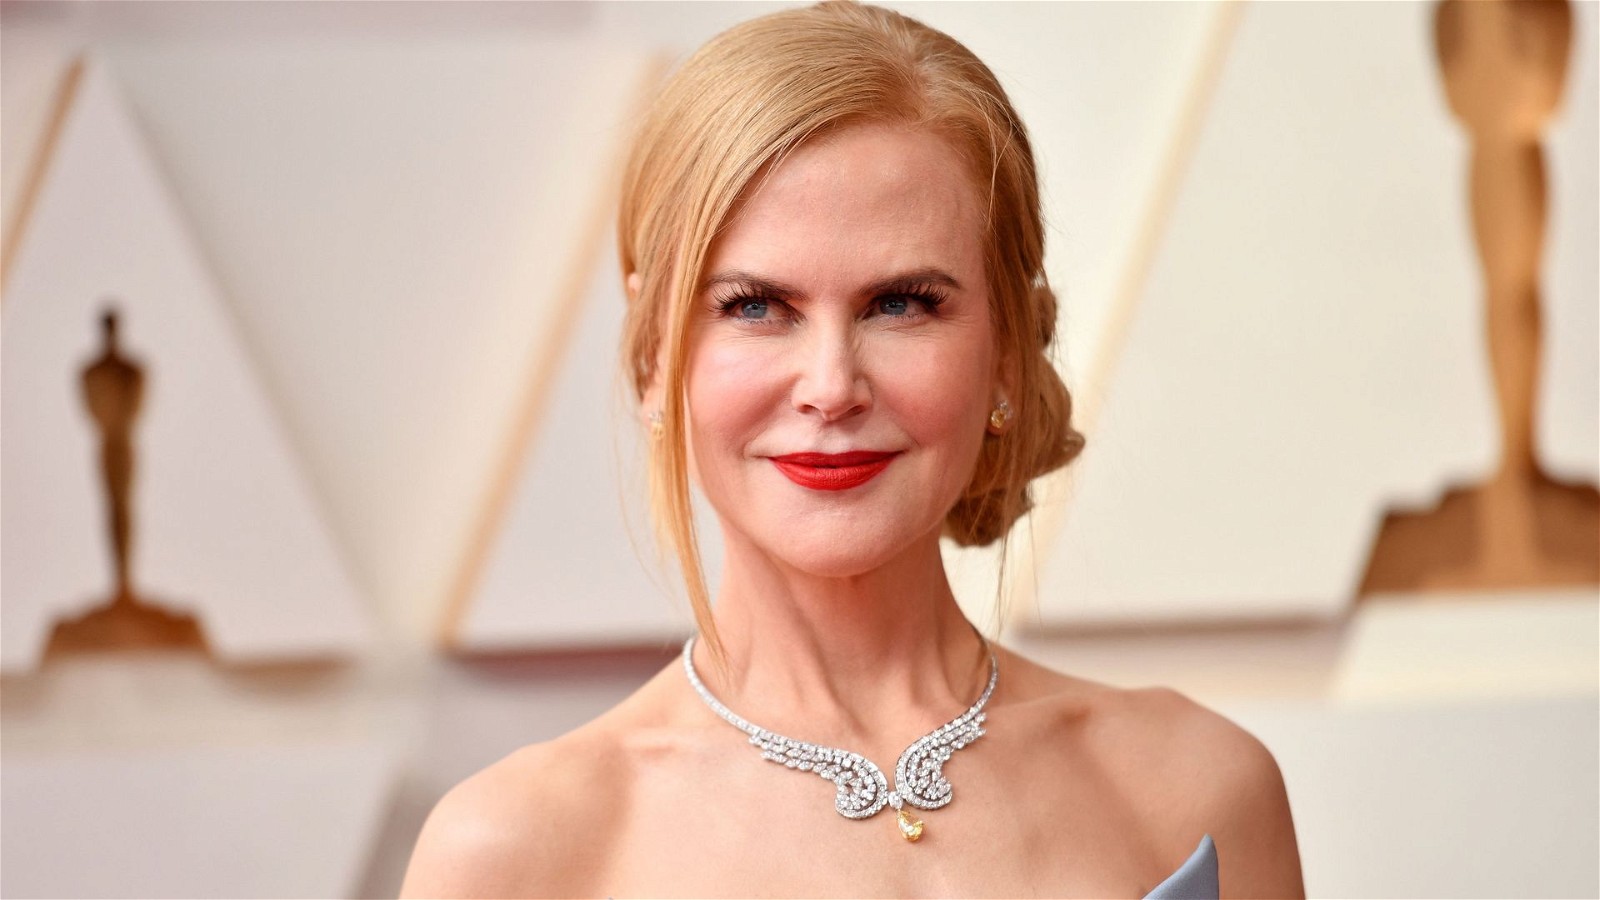 Nicole Kidman turned down The Reader's Oscar-winning role due to safety concerns